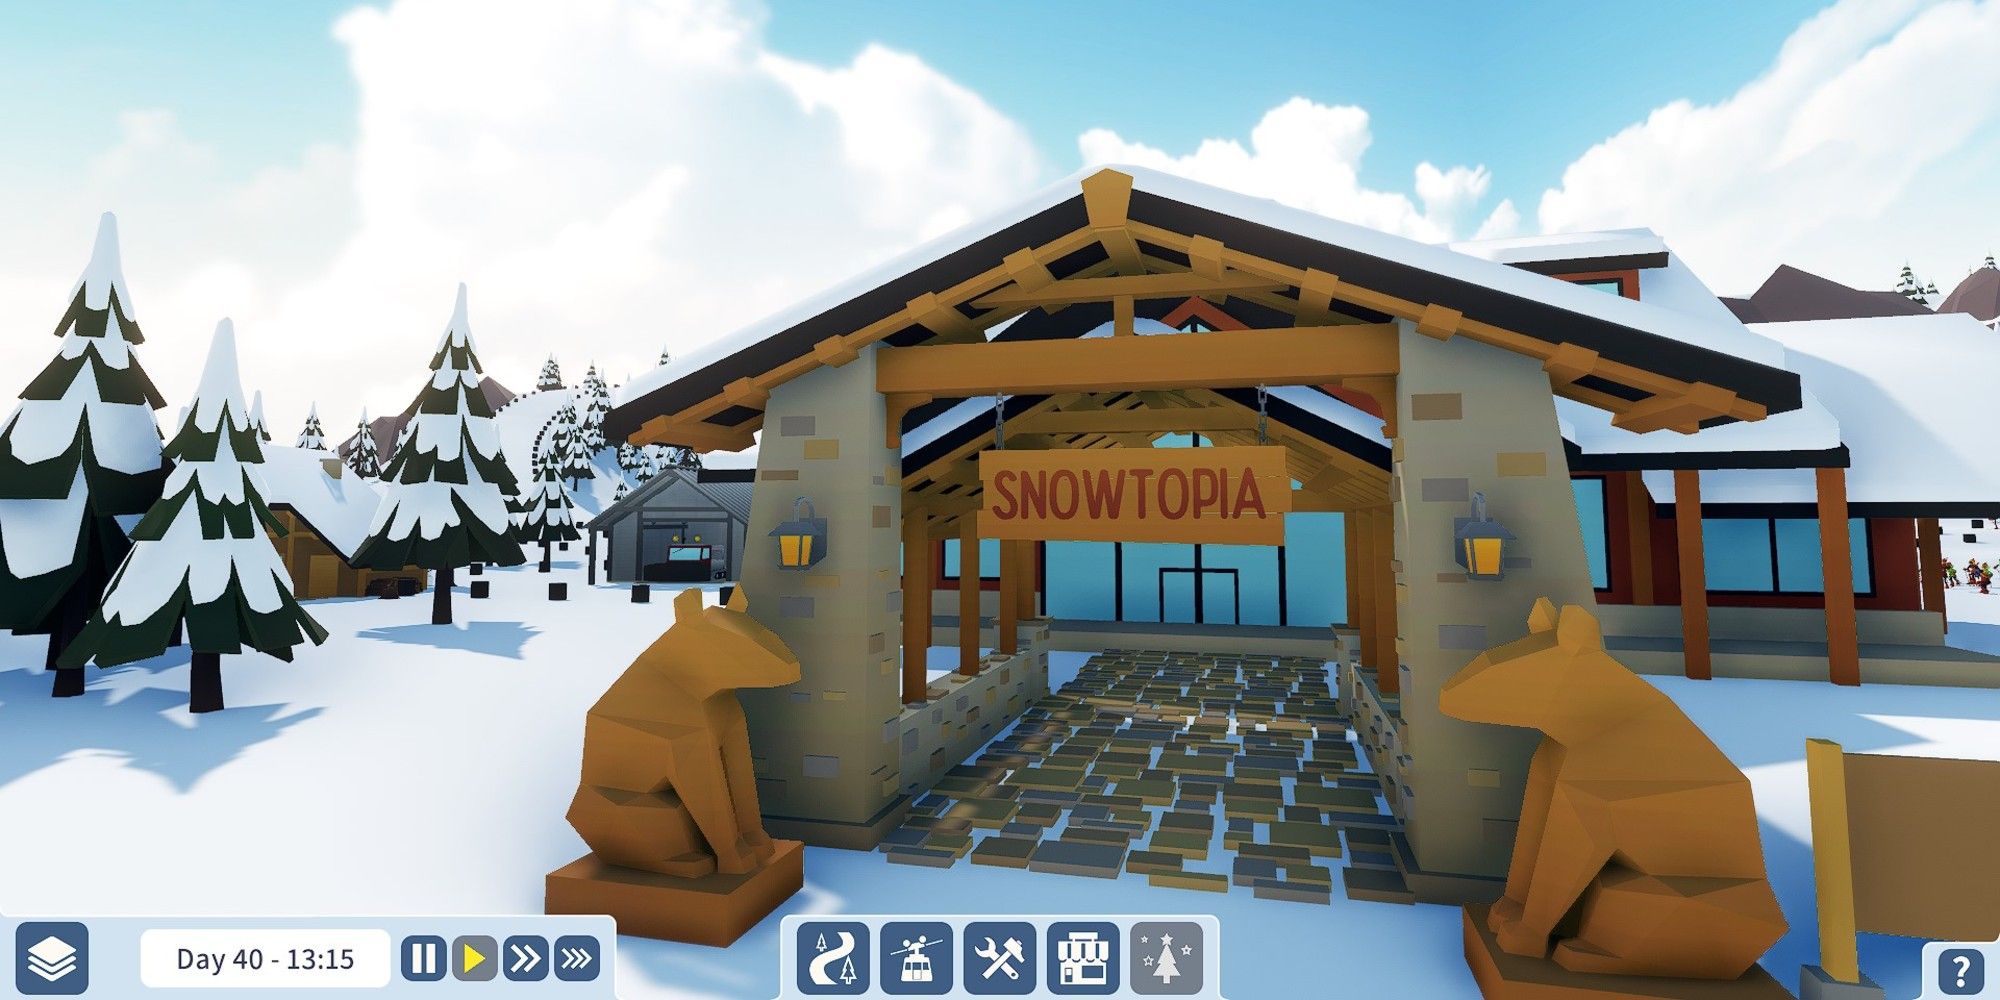 Snowtopia Preview: The Peak of Management Sims | Screen Rant